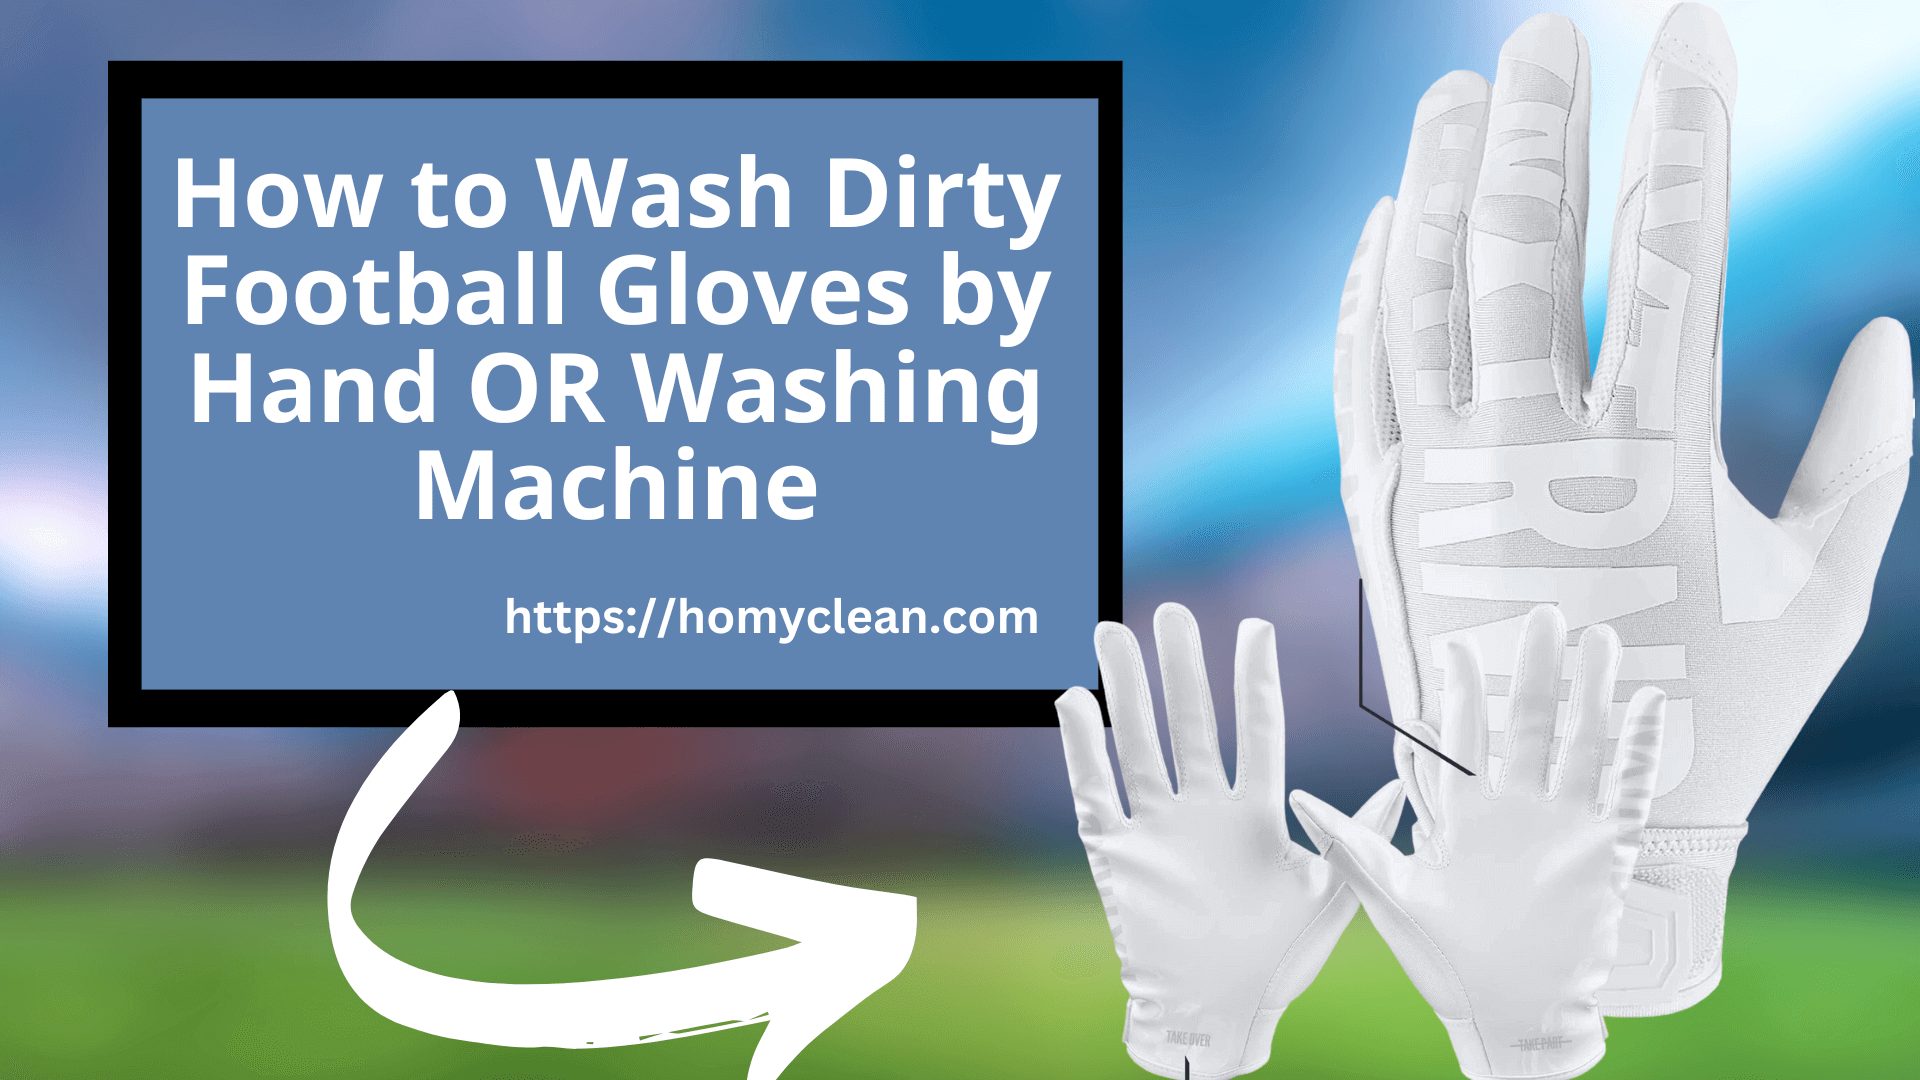 How to Wash Dirty Football Gloves By Hand and Washing Machine